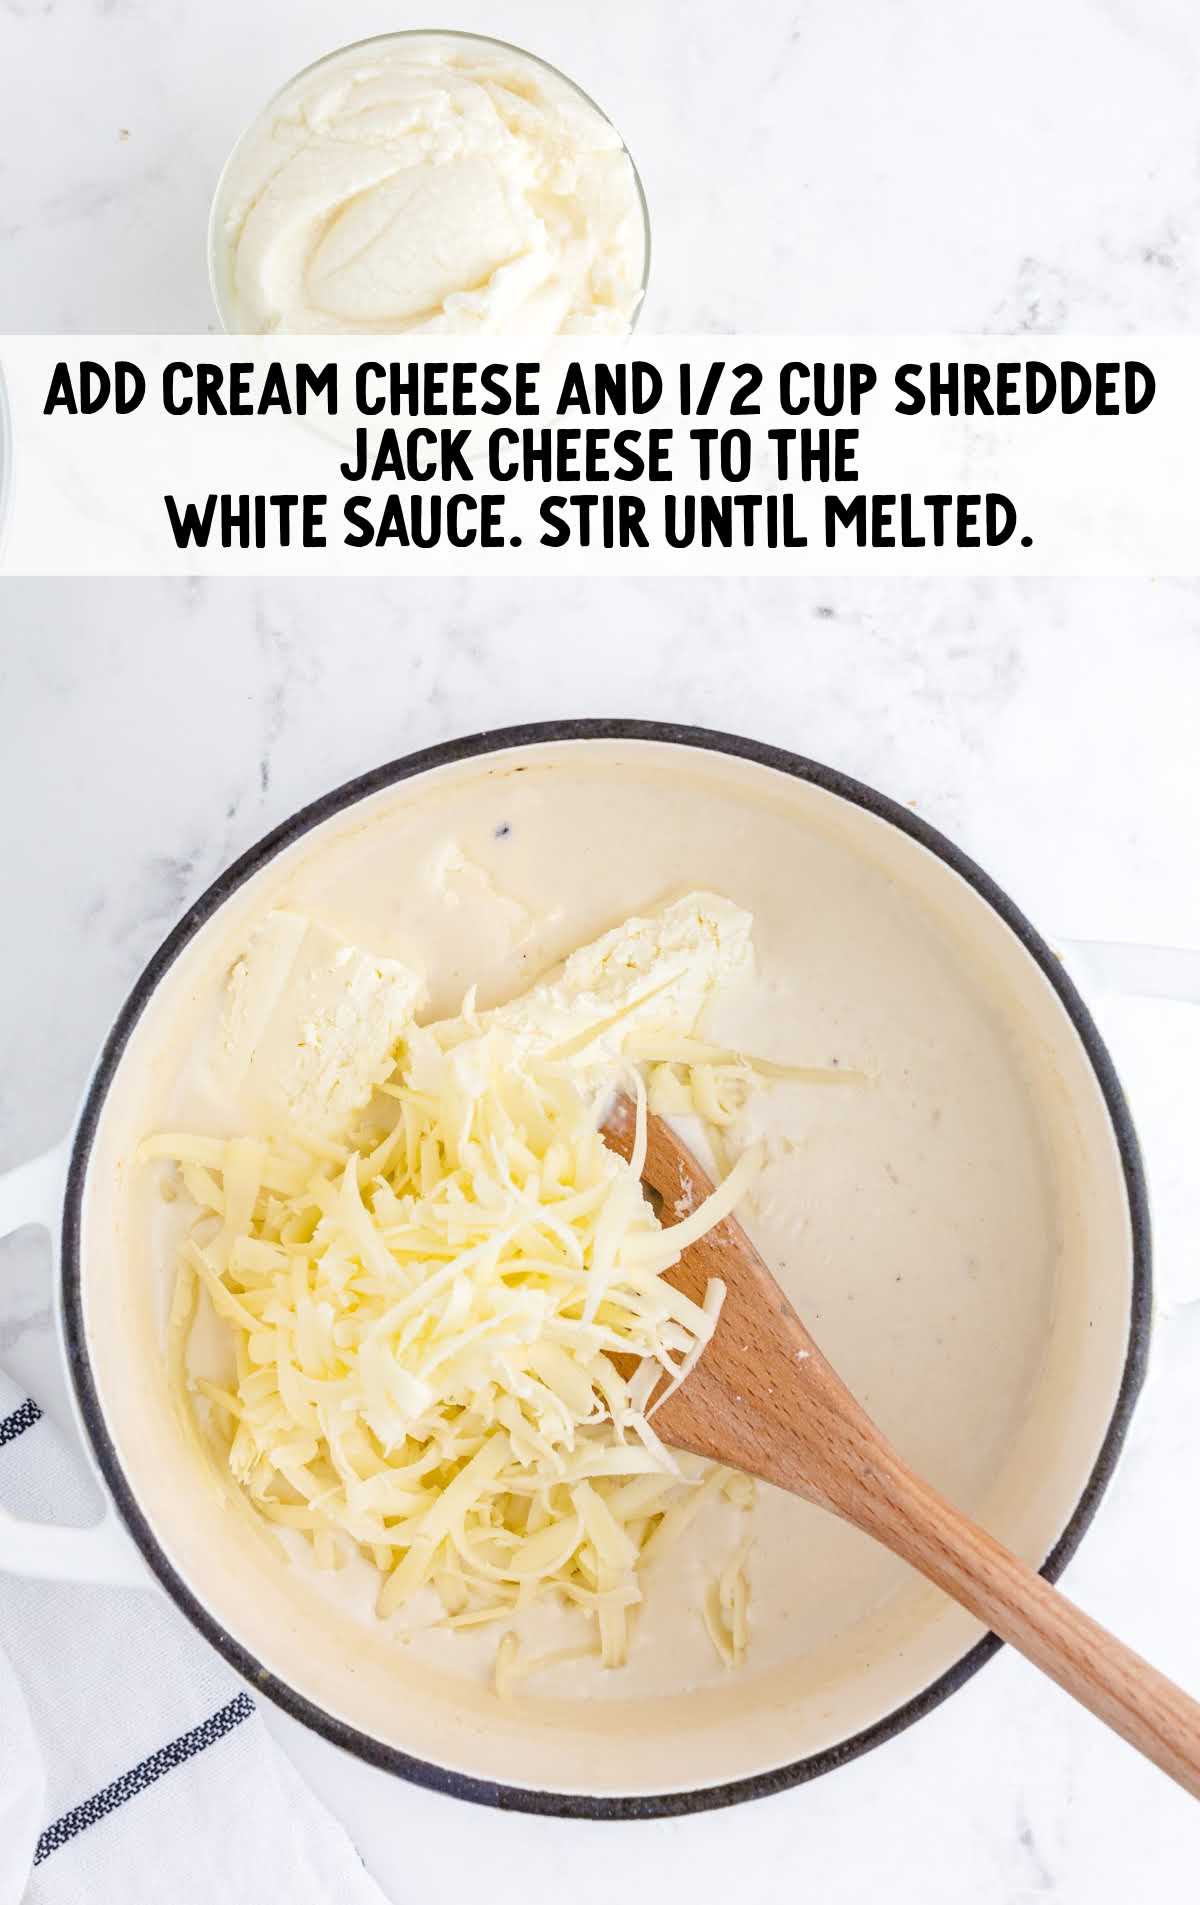 cream cheese and shredded jack cheese added to the white sauce